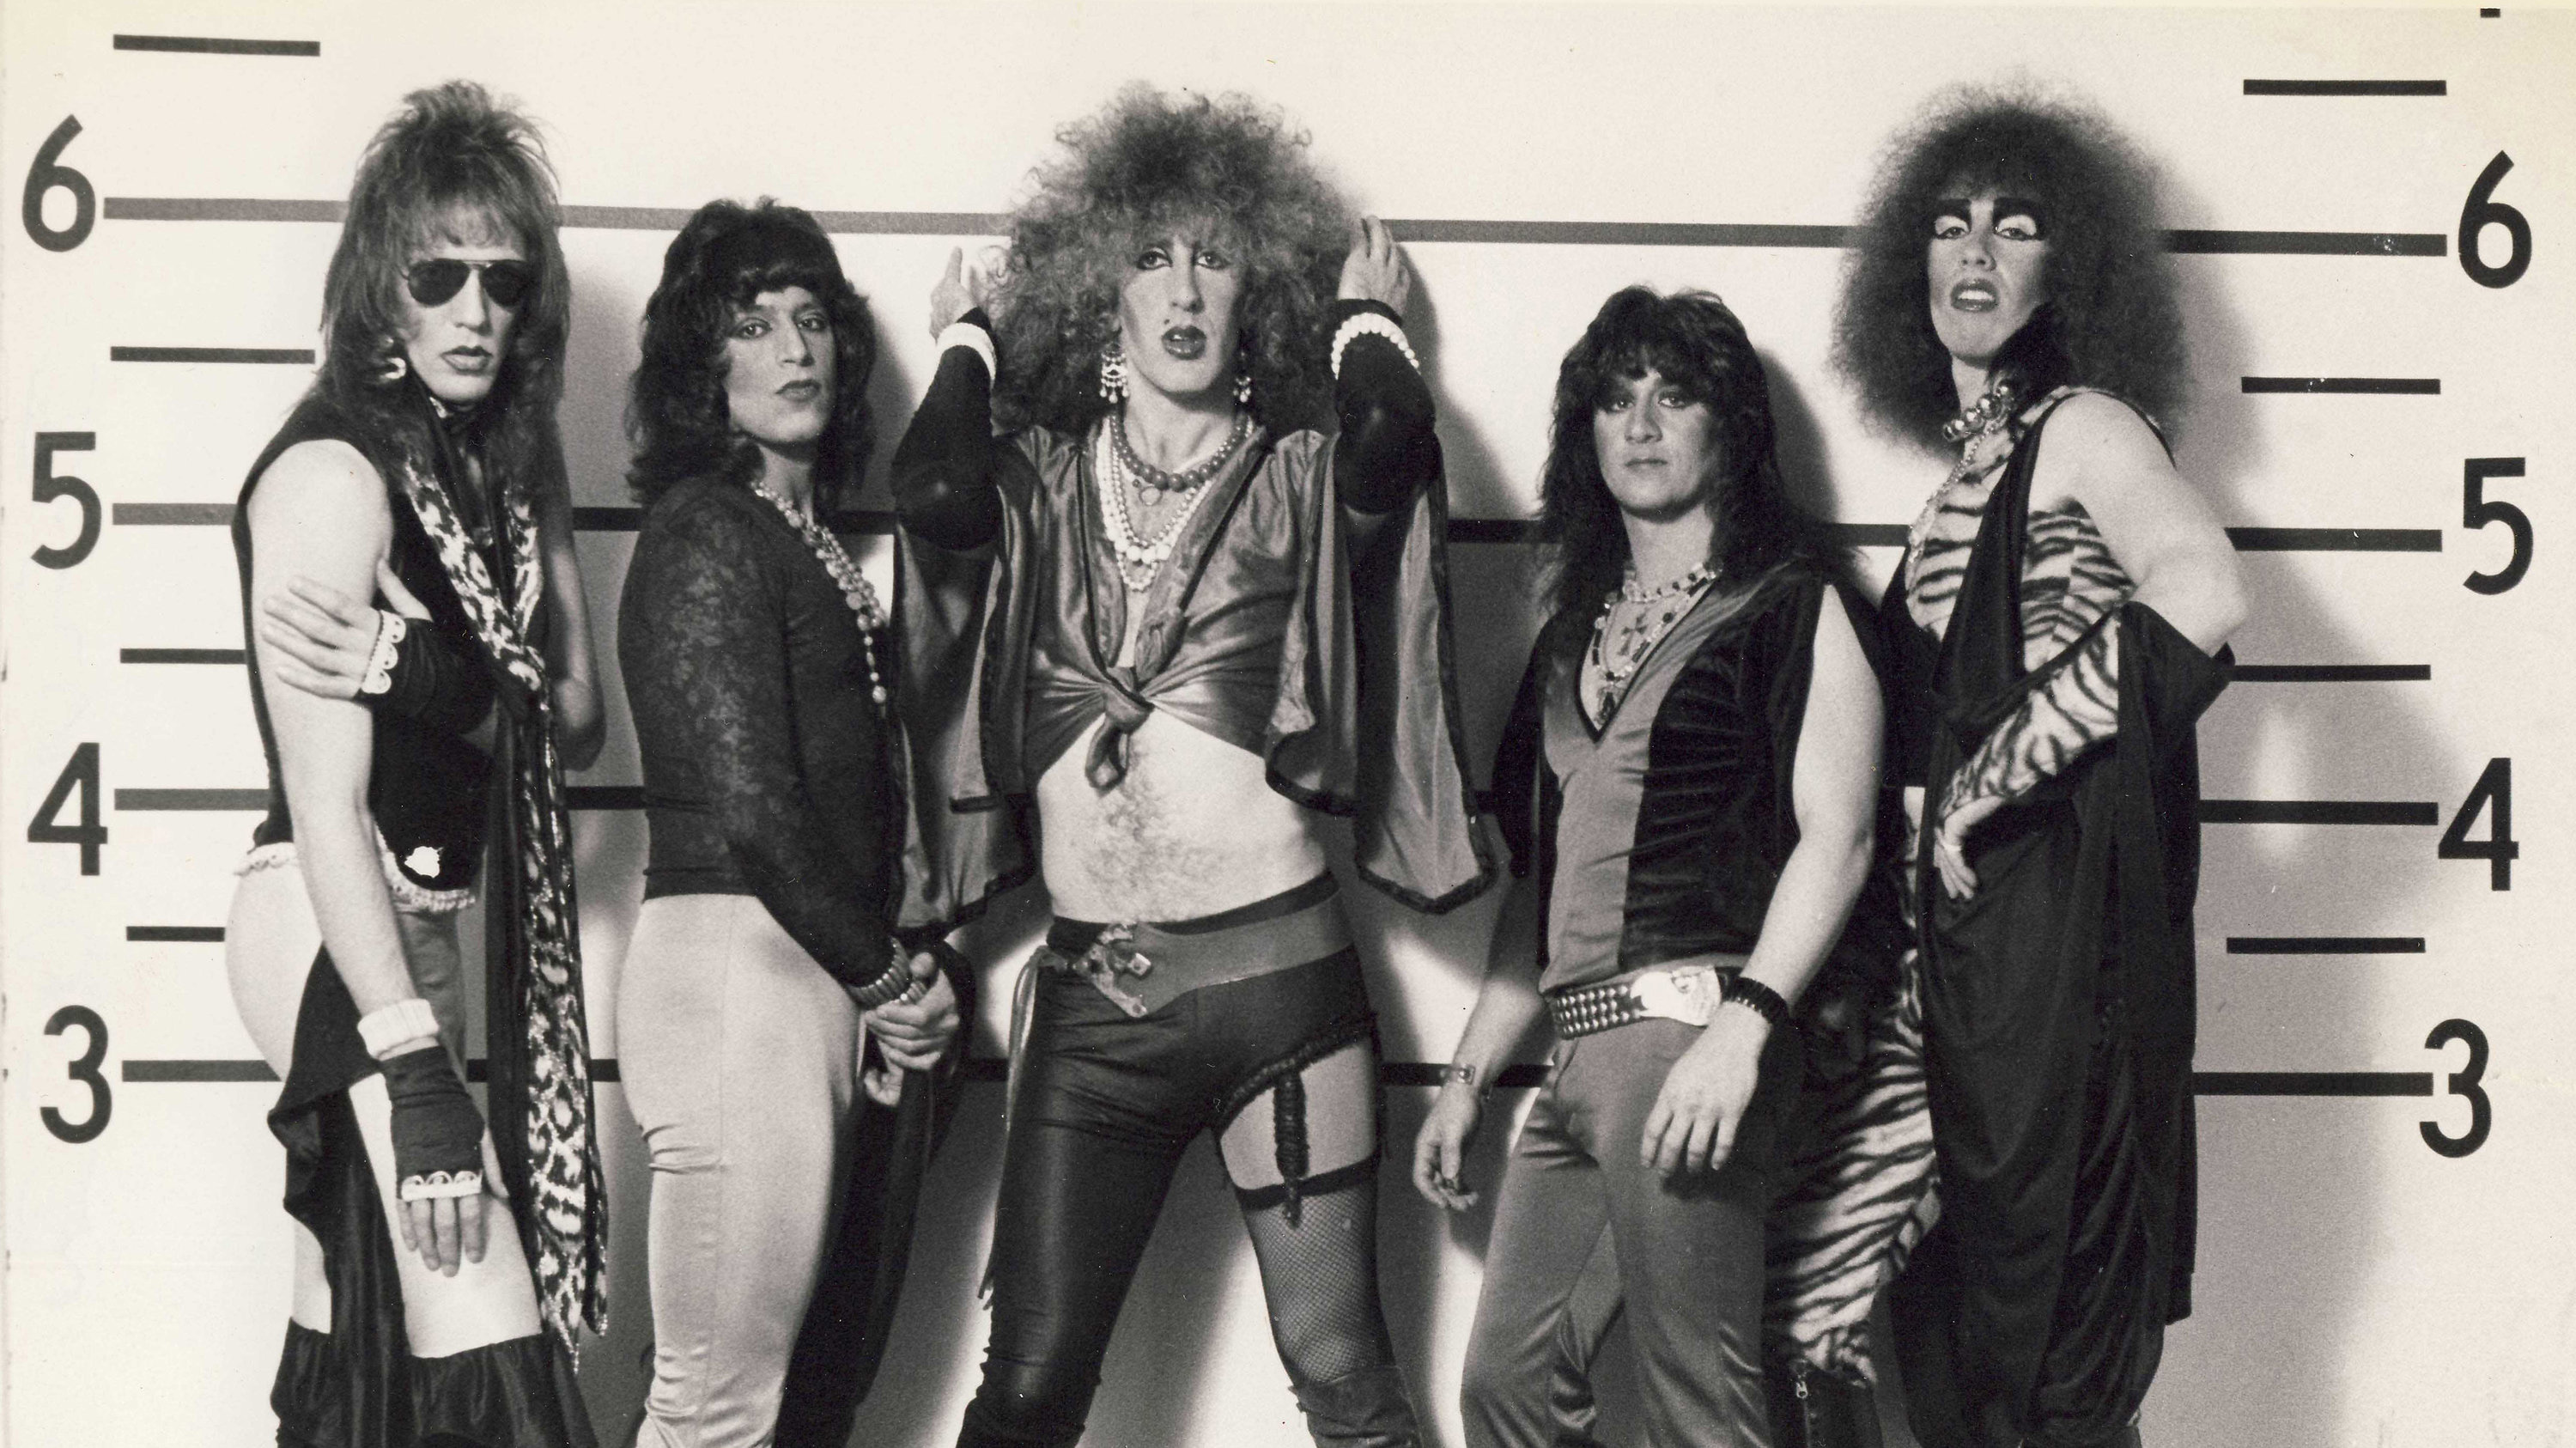 Review: Twisted Sister's Hard Road and Drummer Shortage - The New York Times 3000x1690